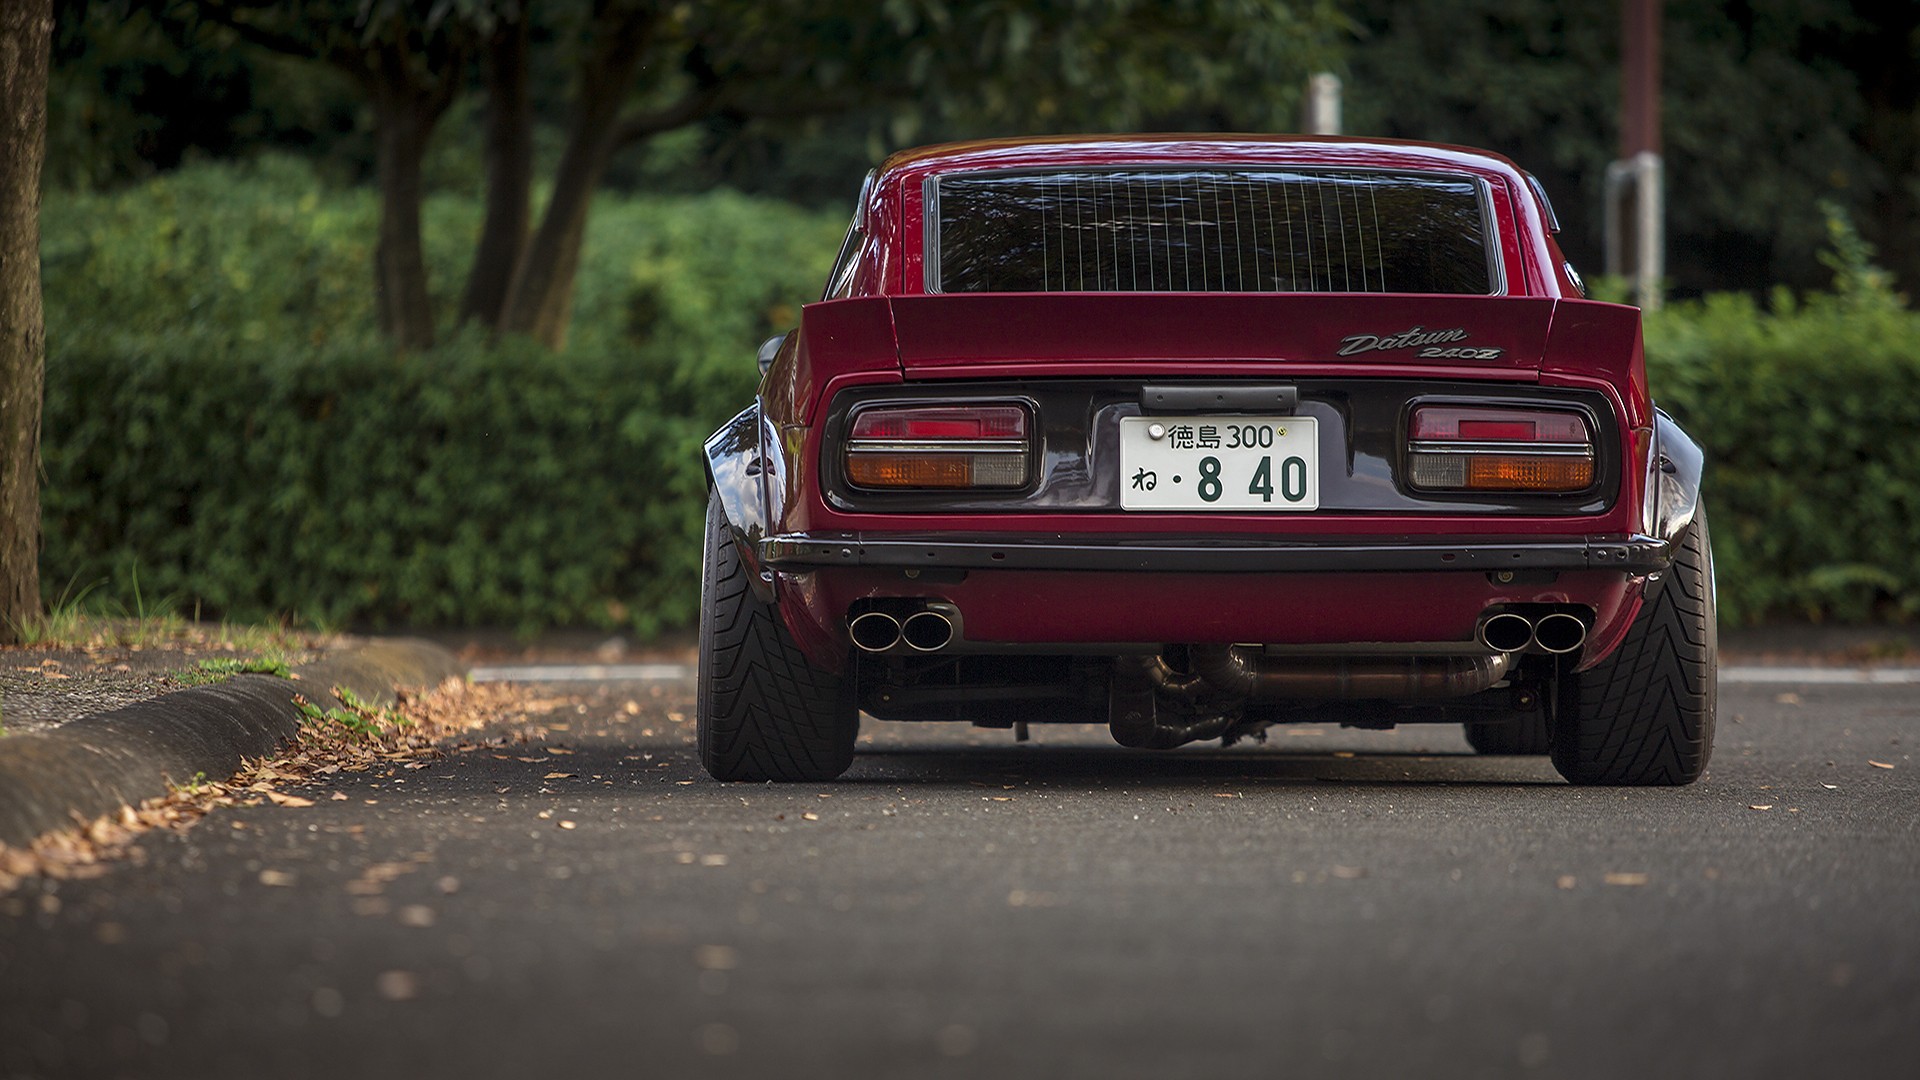 General 1920x1080 Nissan numbers vehicle car red cars Nissan S30 rear view bolt-on fender flares Japanese cars